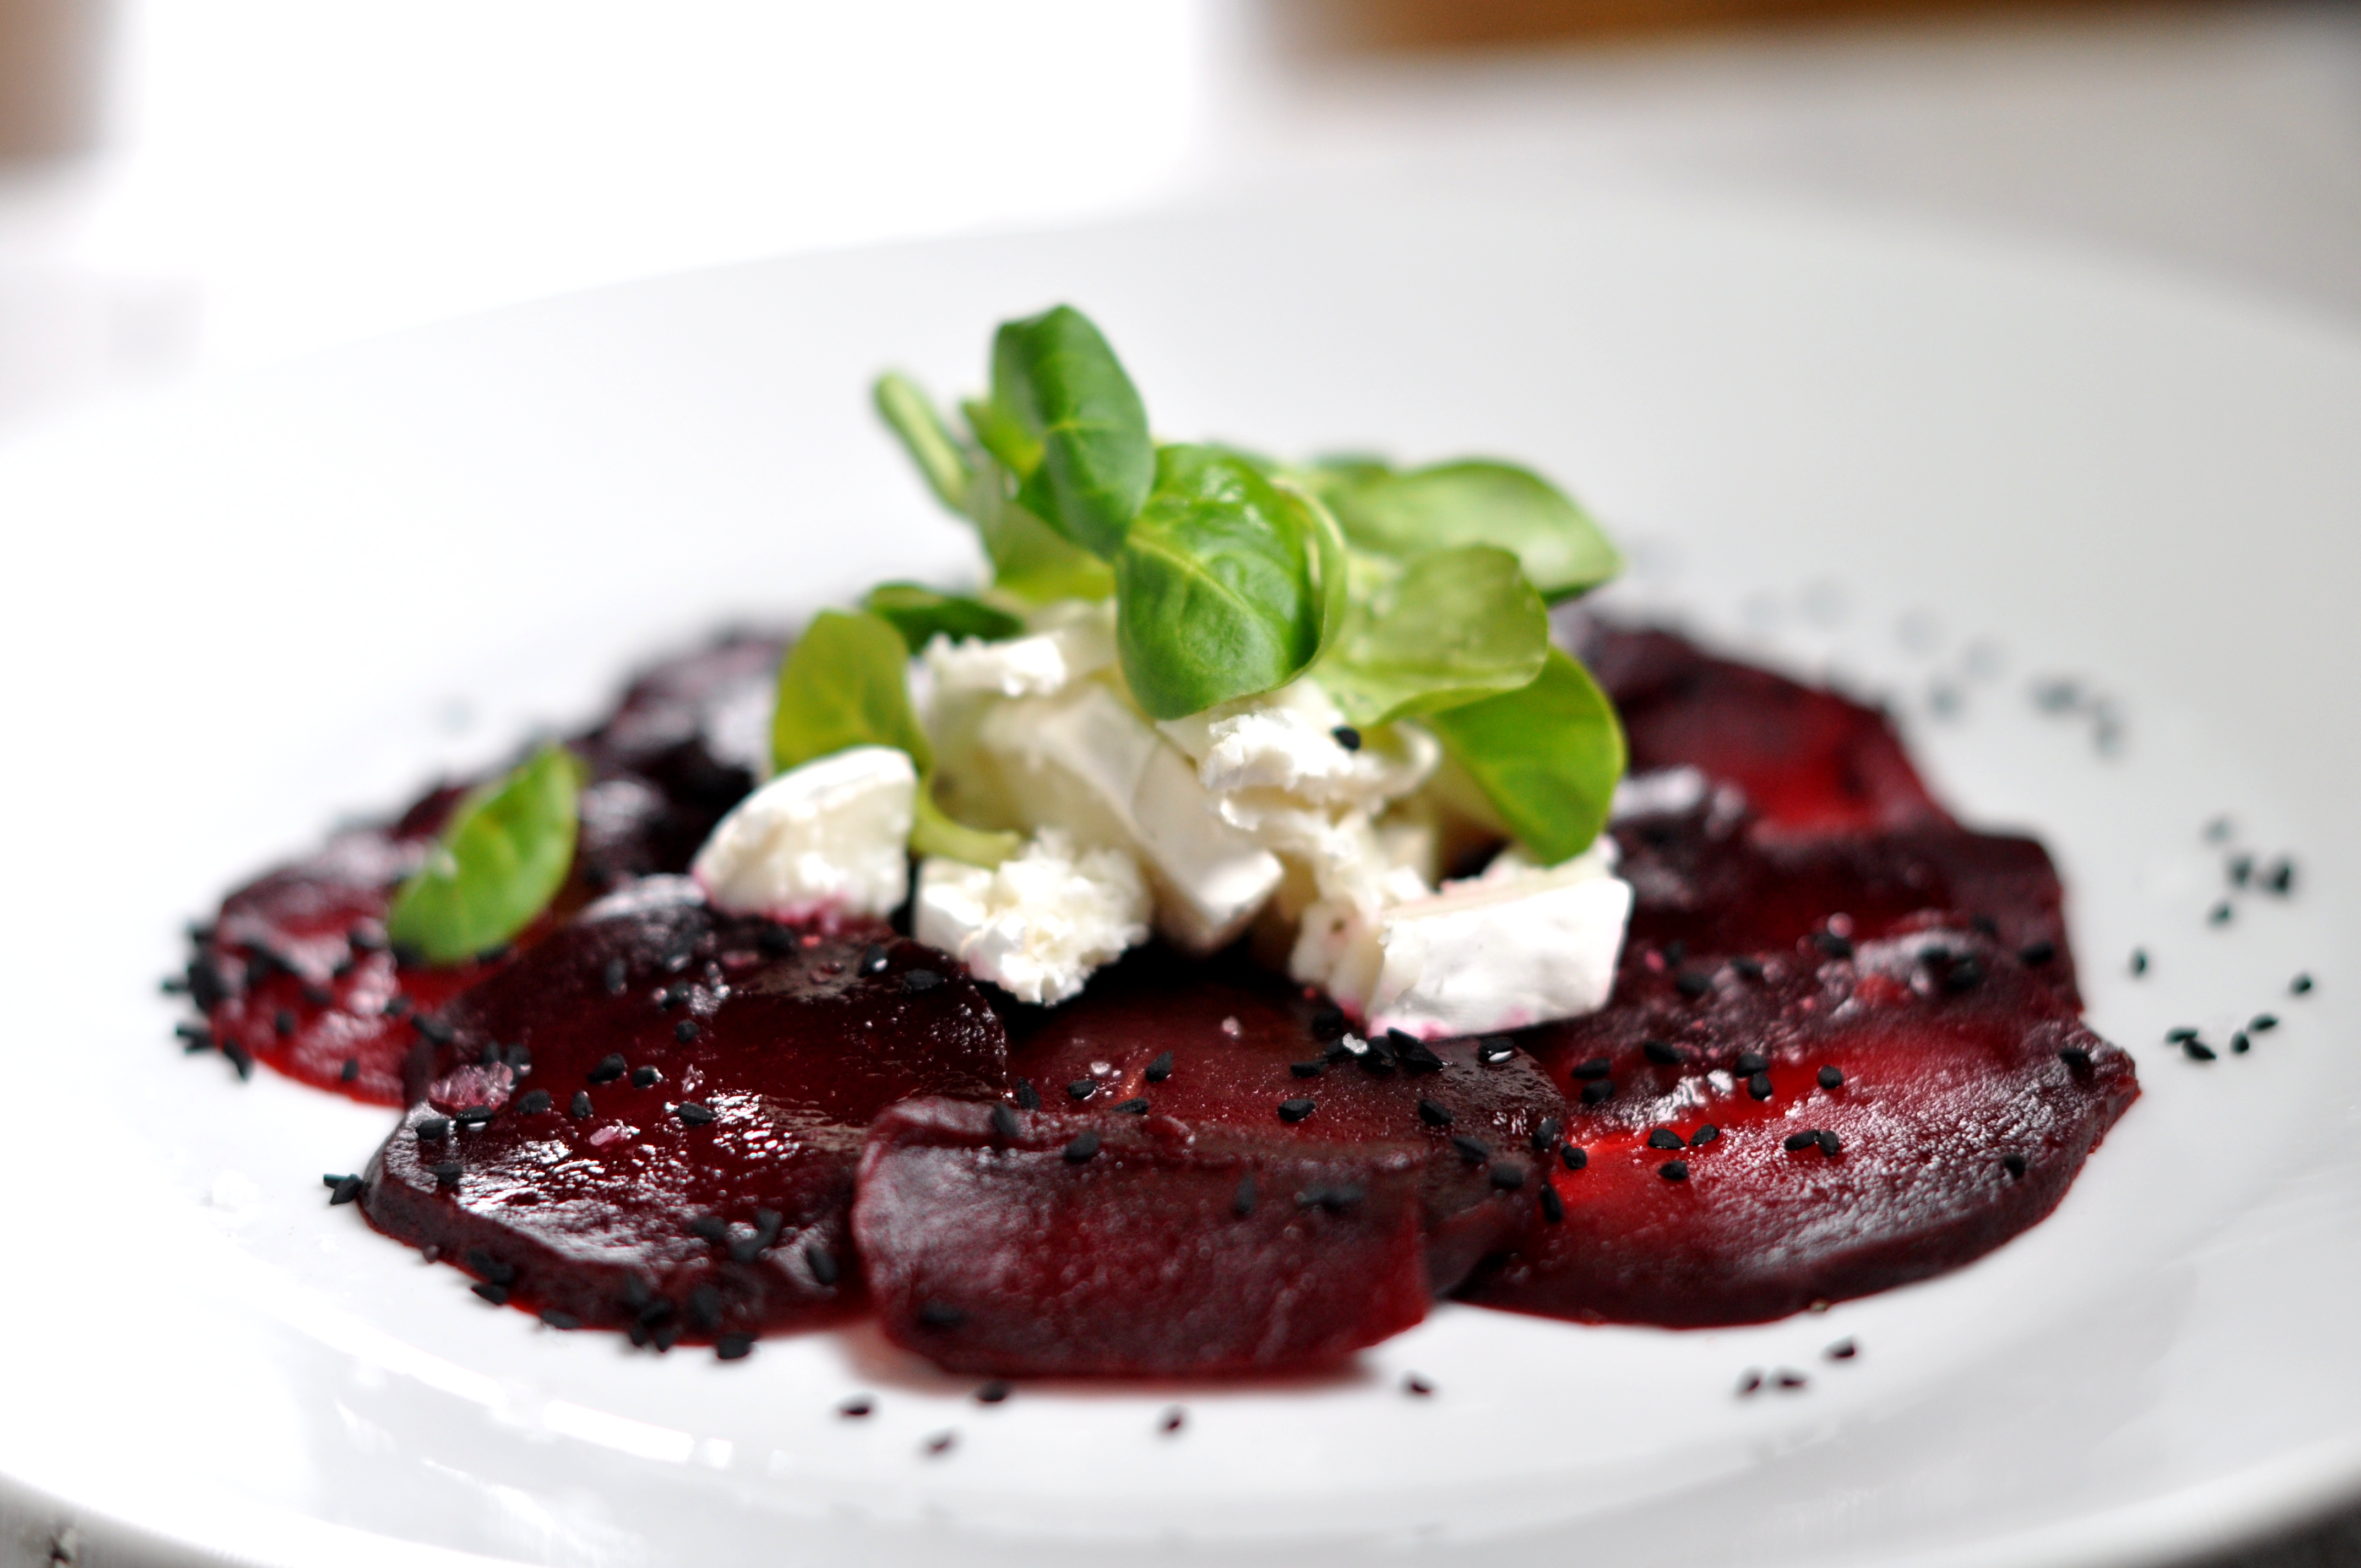 Beetroot carpacio with goat cheese